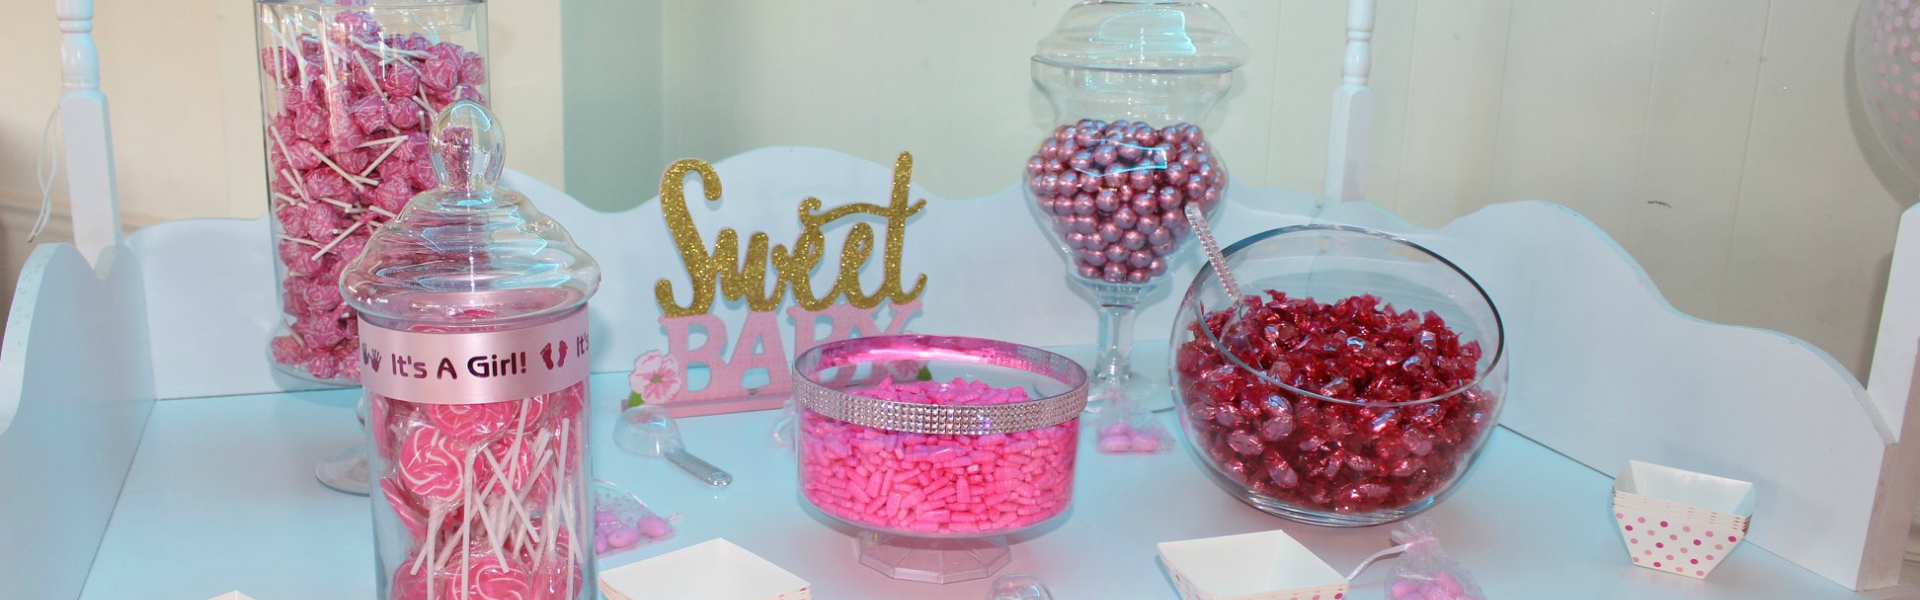 Brittany's Party Extravaganza - Candy Carts